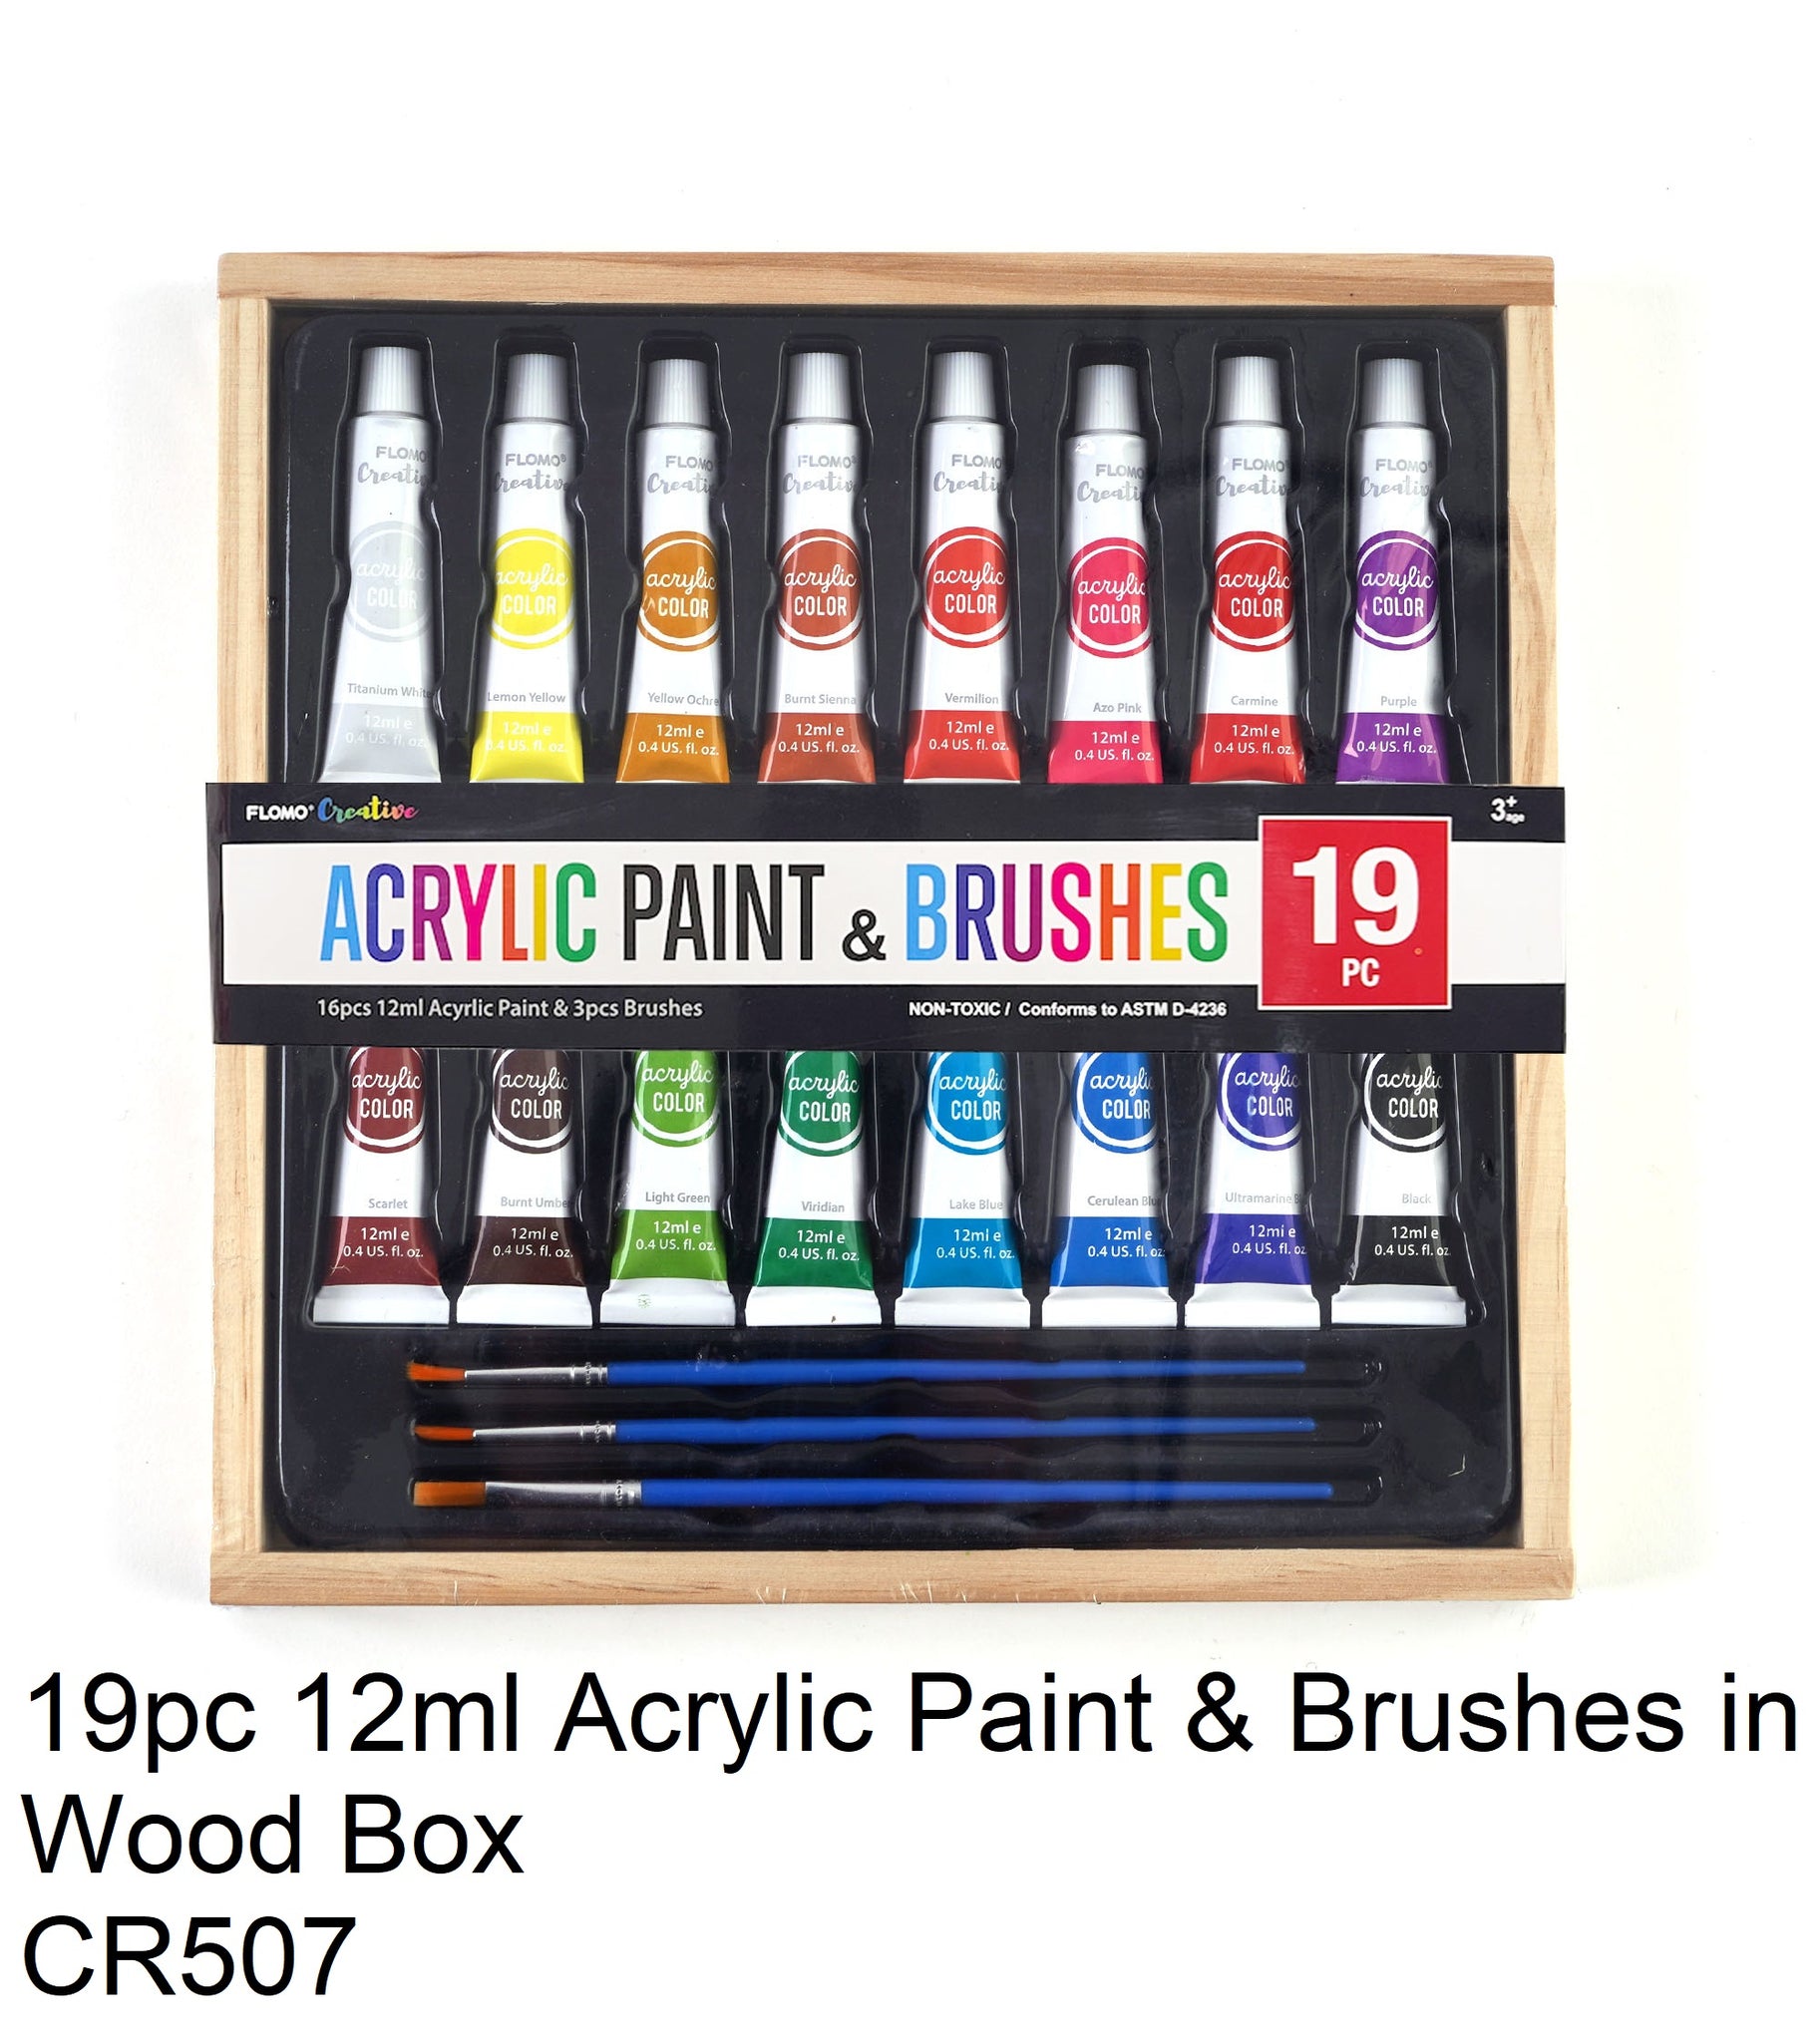 CR507 - 19pc 12ml Acrylic Paint & Brushes in Wood Box